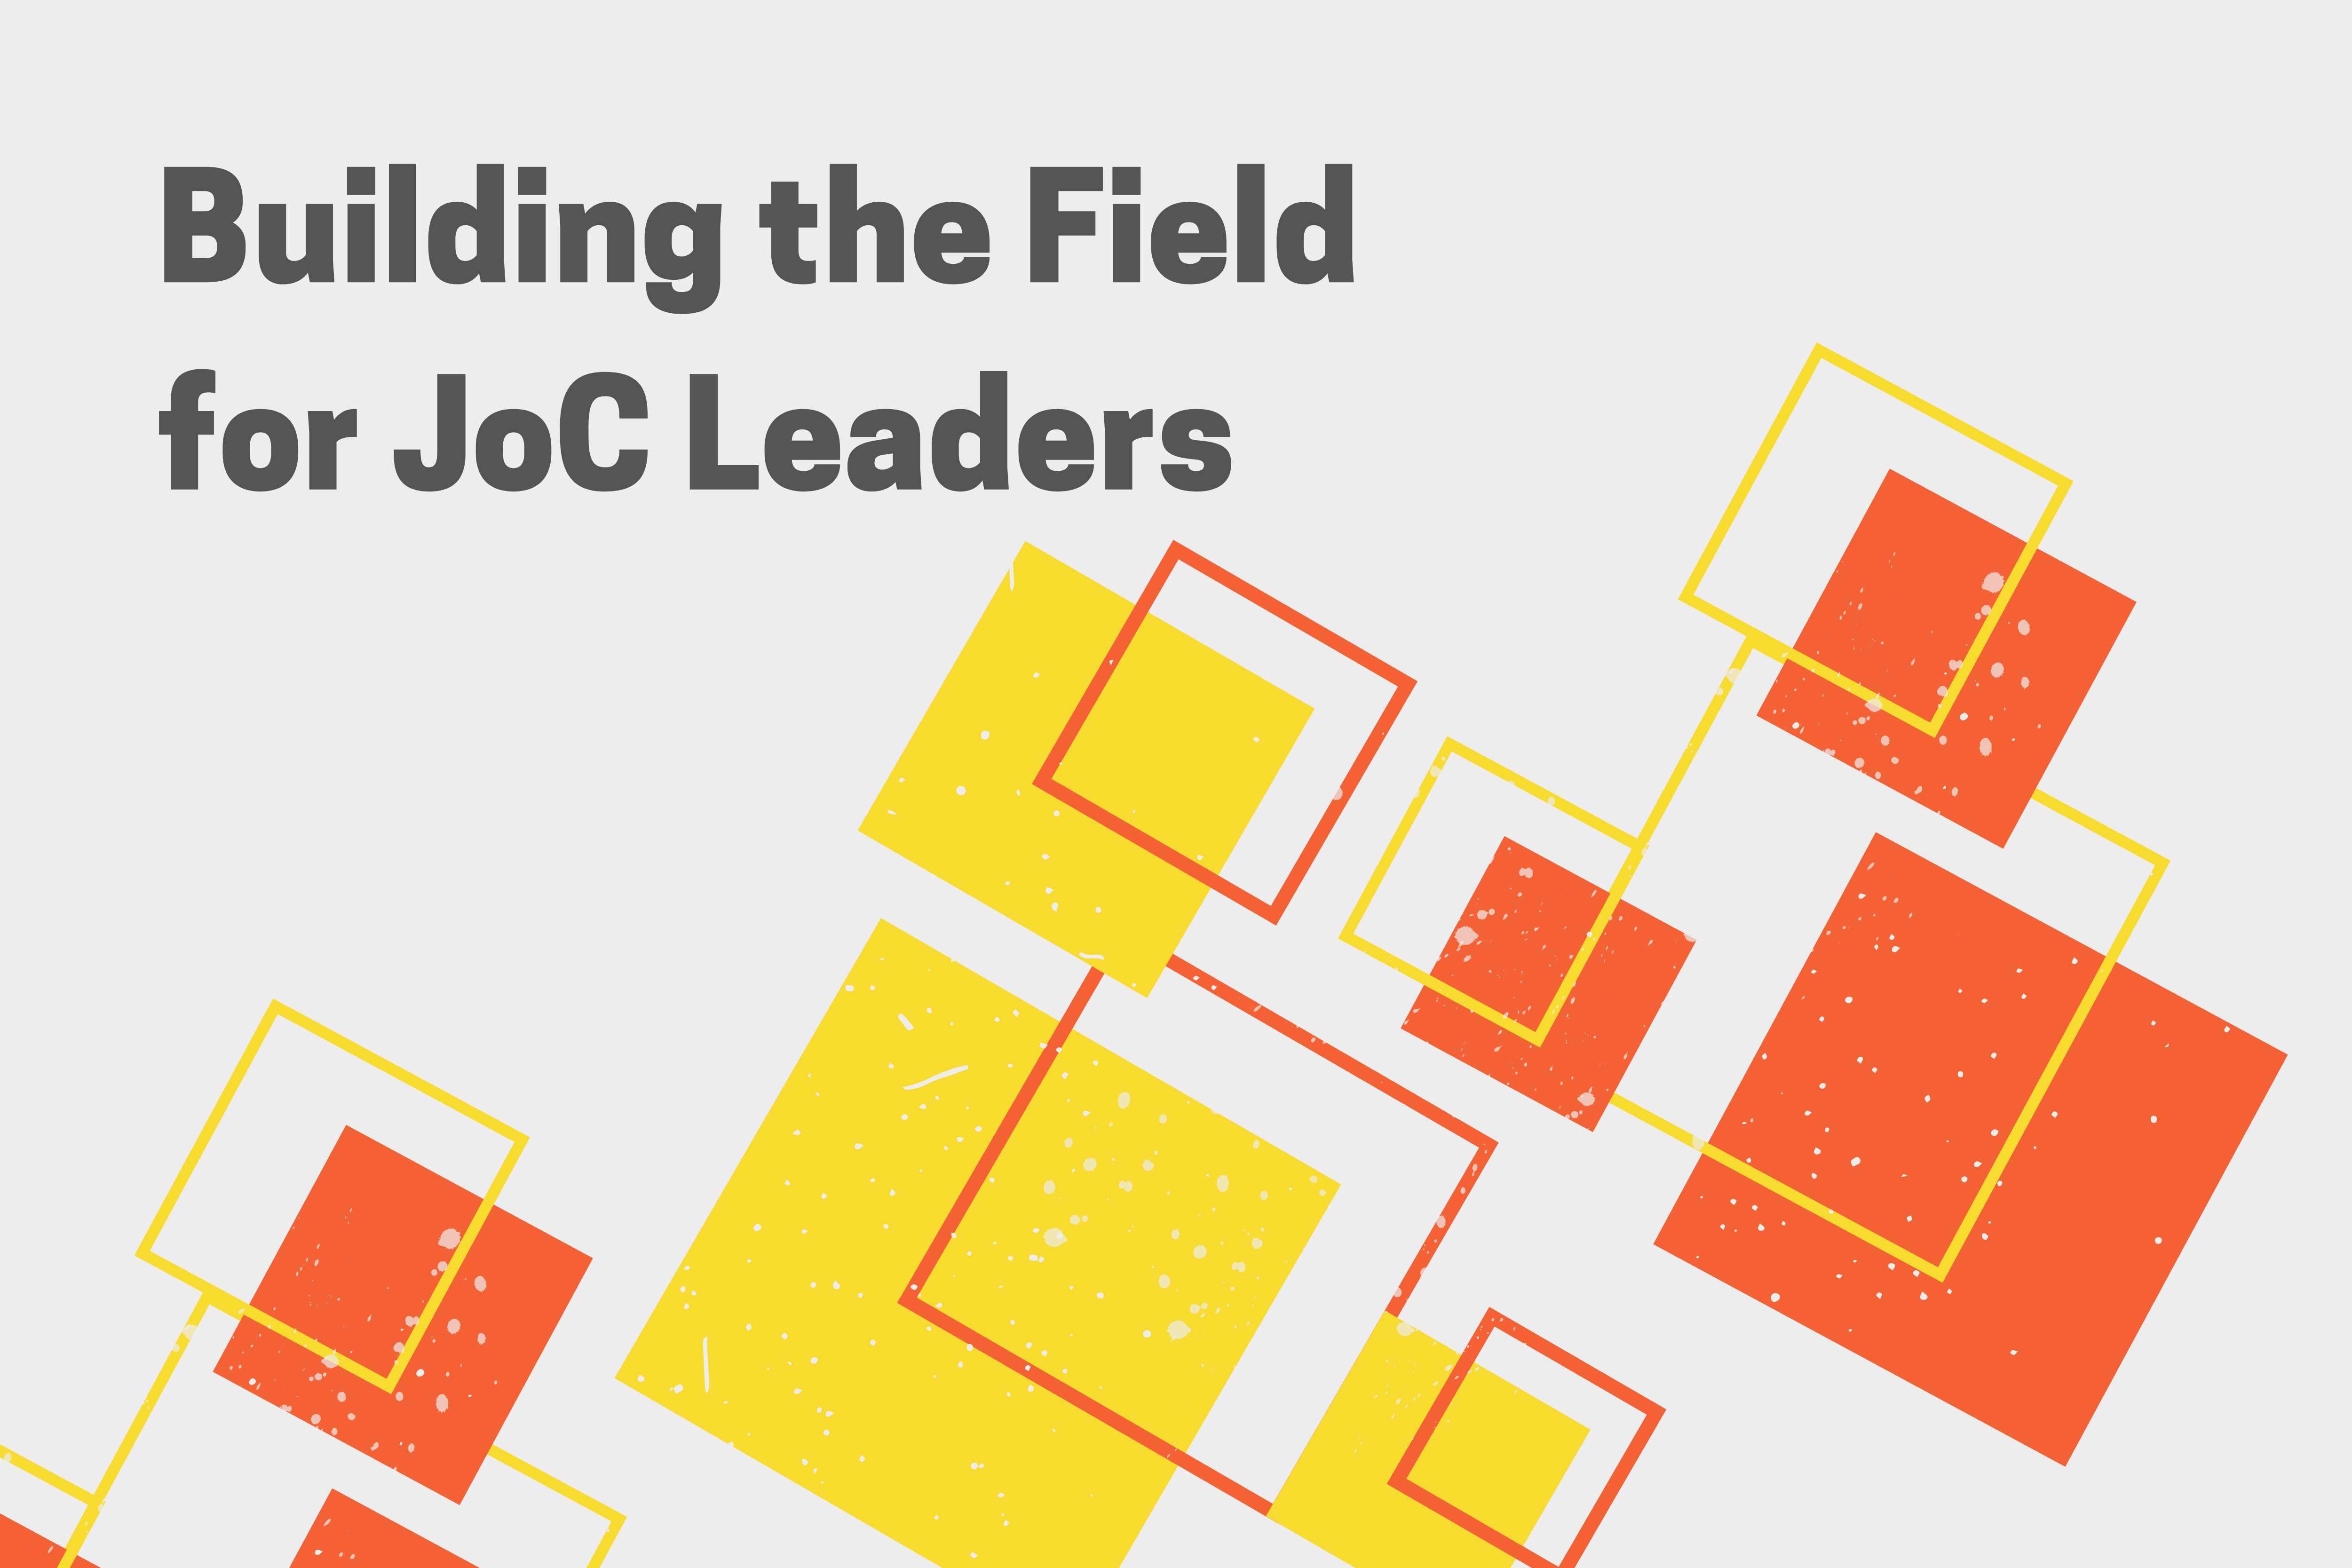 Building the Field for JoC Leaders; image shows geometric pattern of overlapping squares in yellow and deep orange